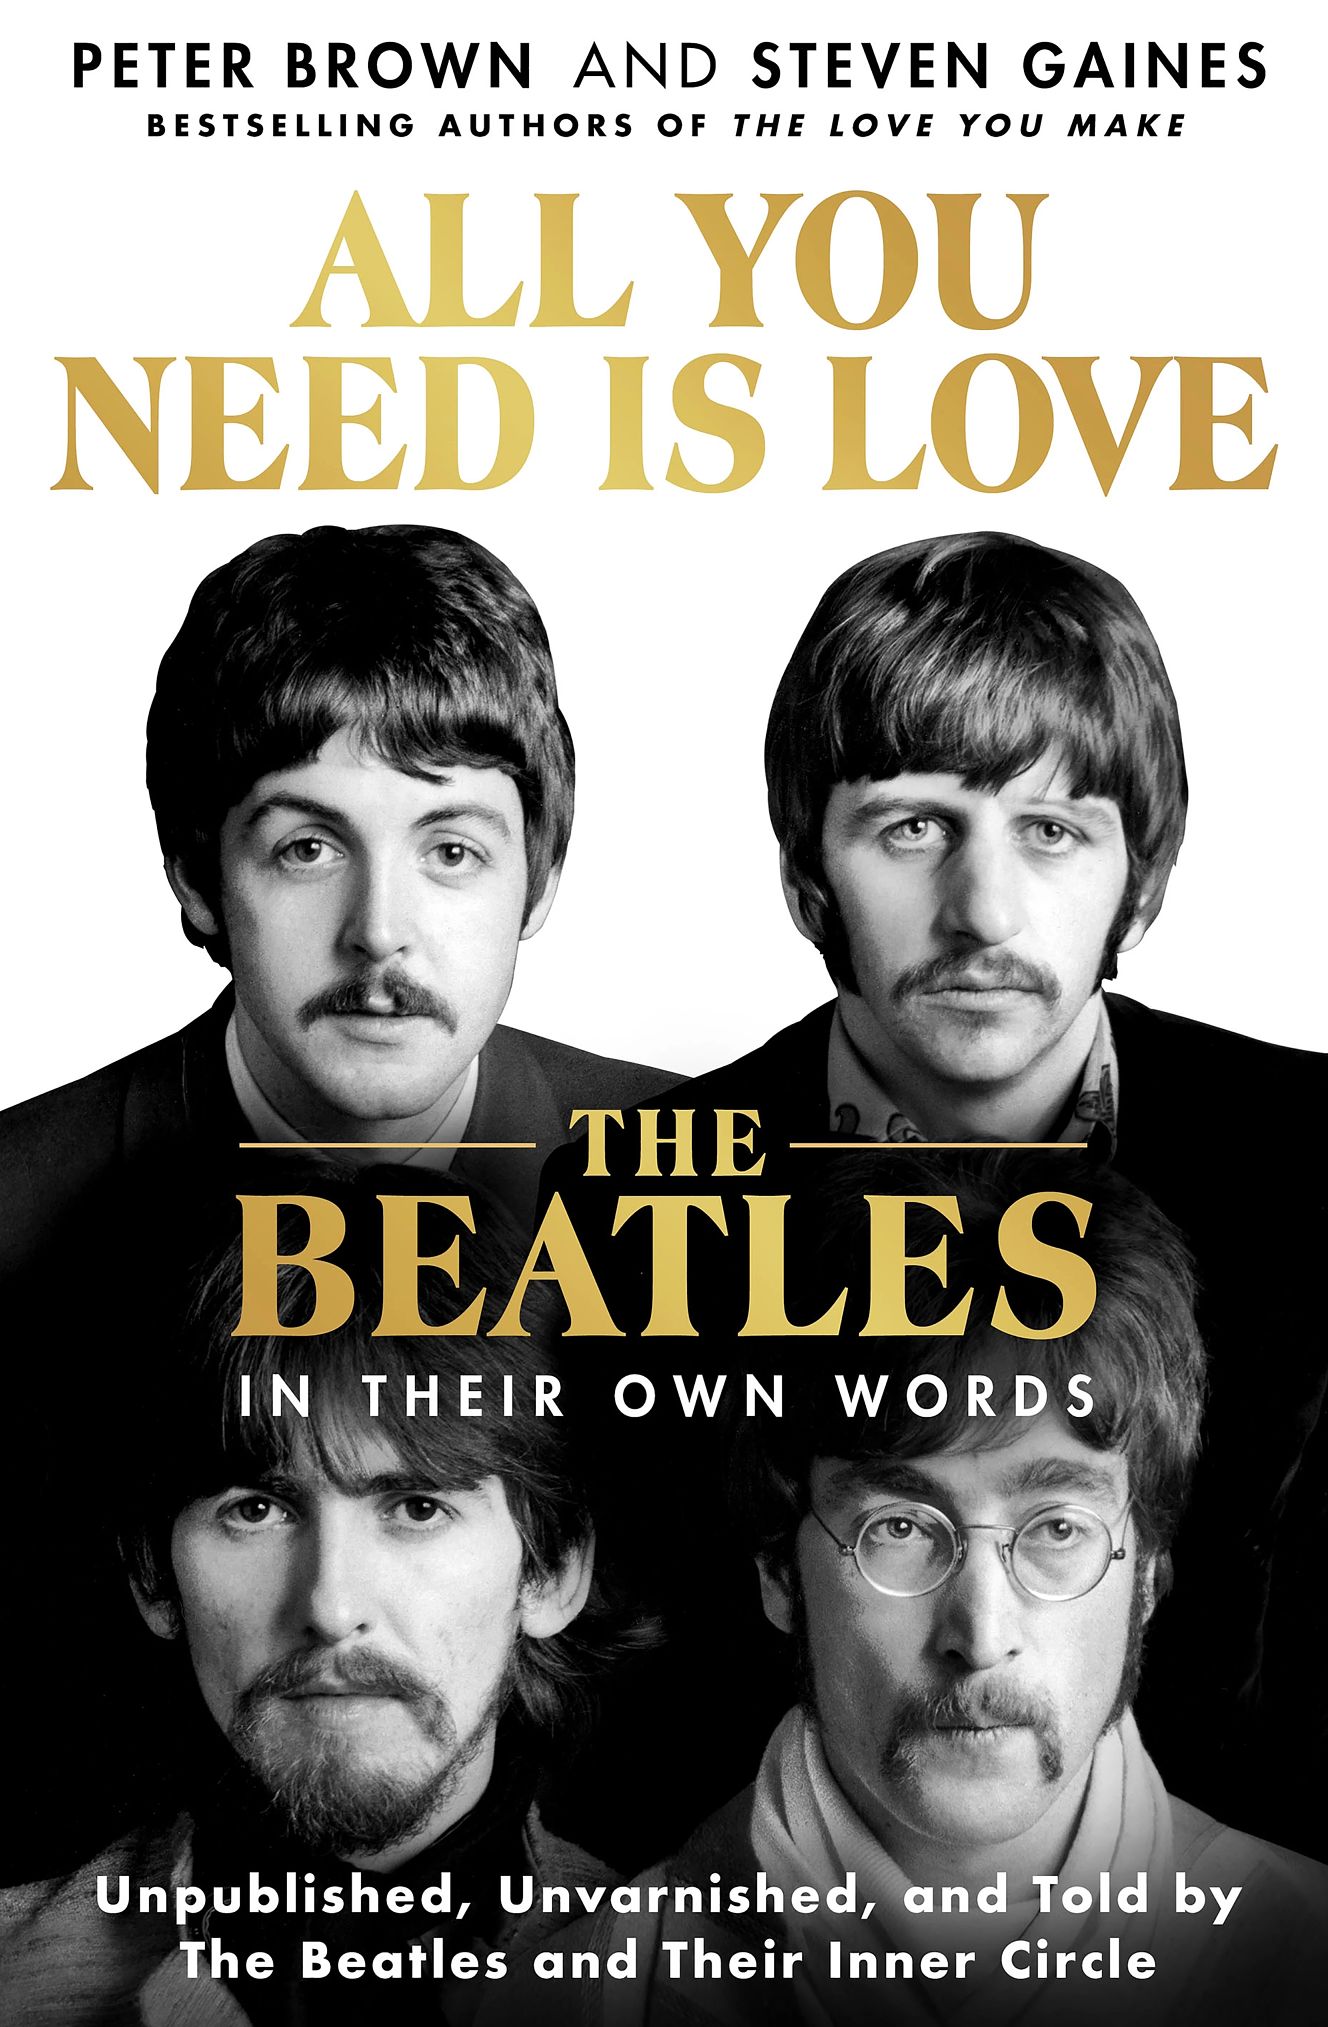 The book cover for All You Need Is Love: The Beatles in Their Own Words